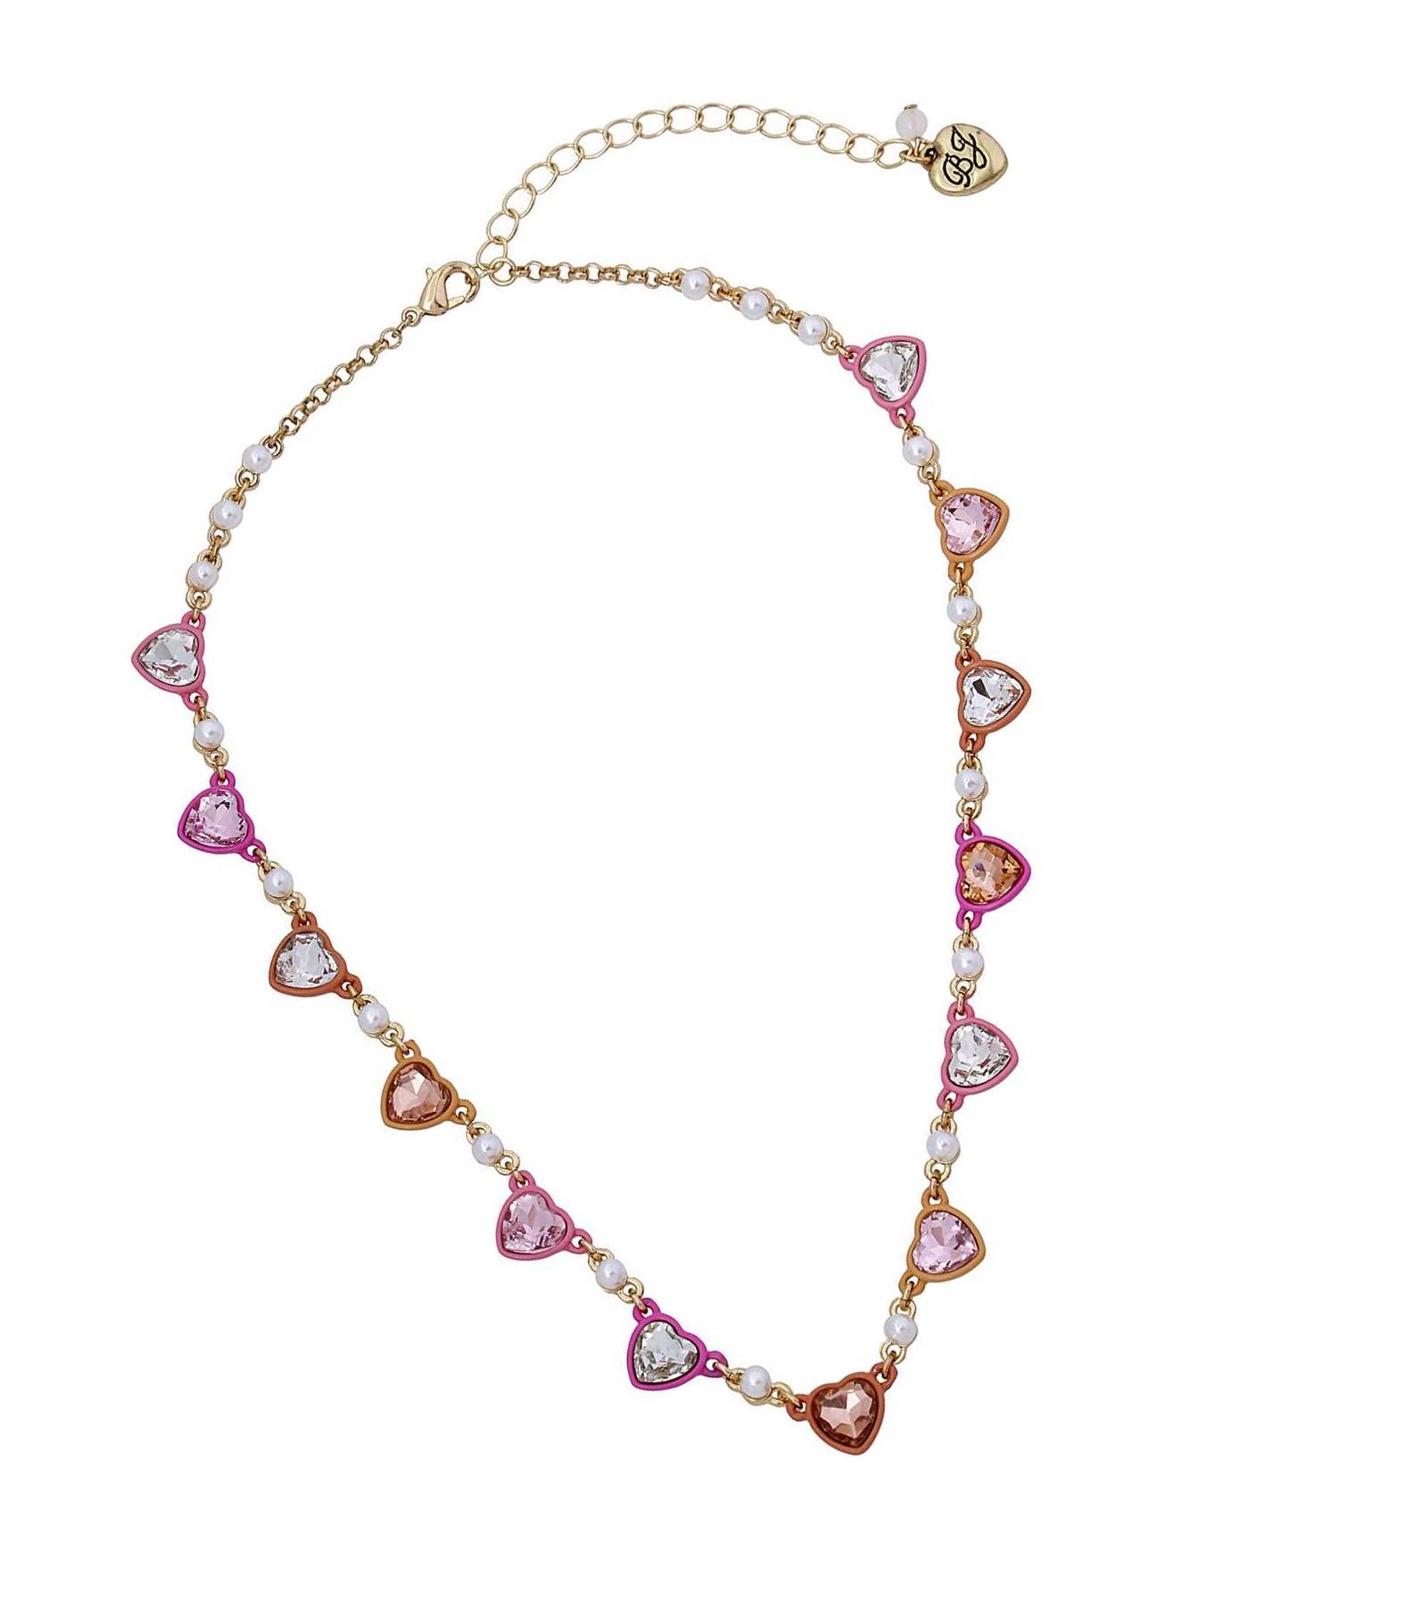 Primary image for Stone Heart Collar Necklace